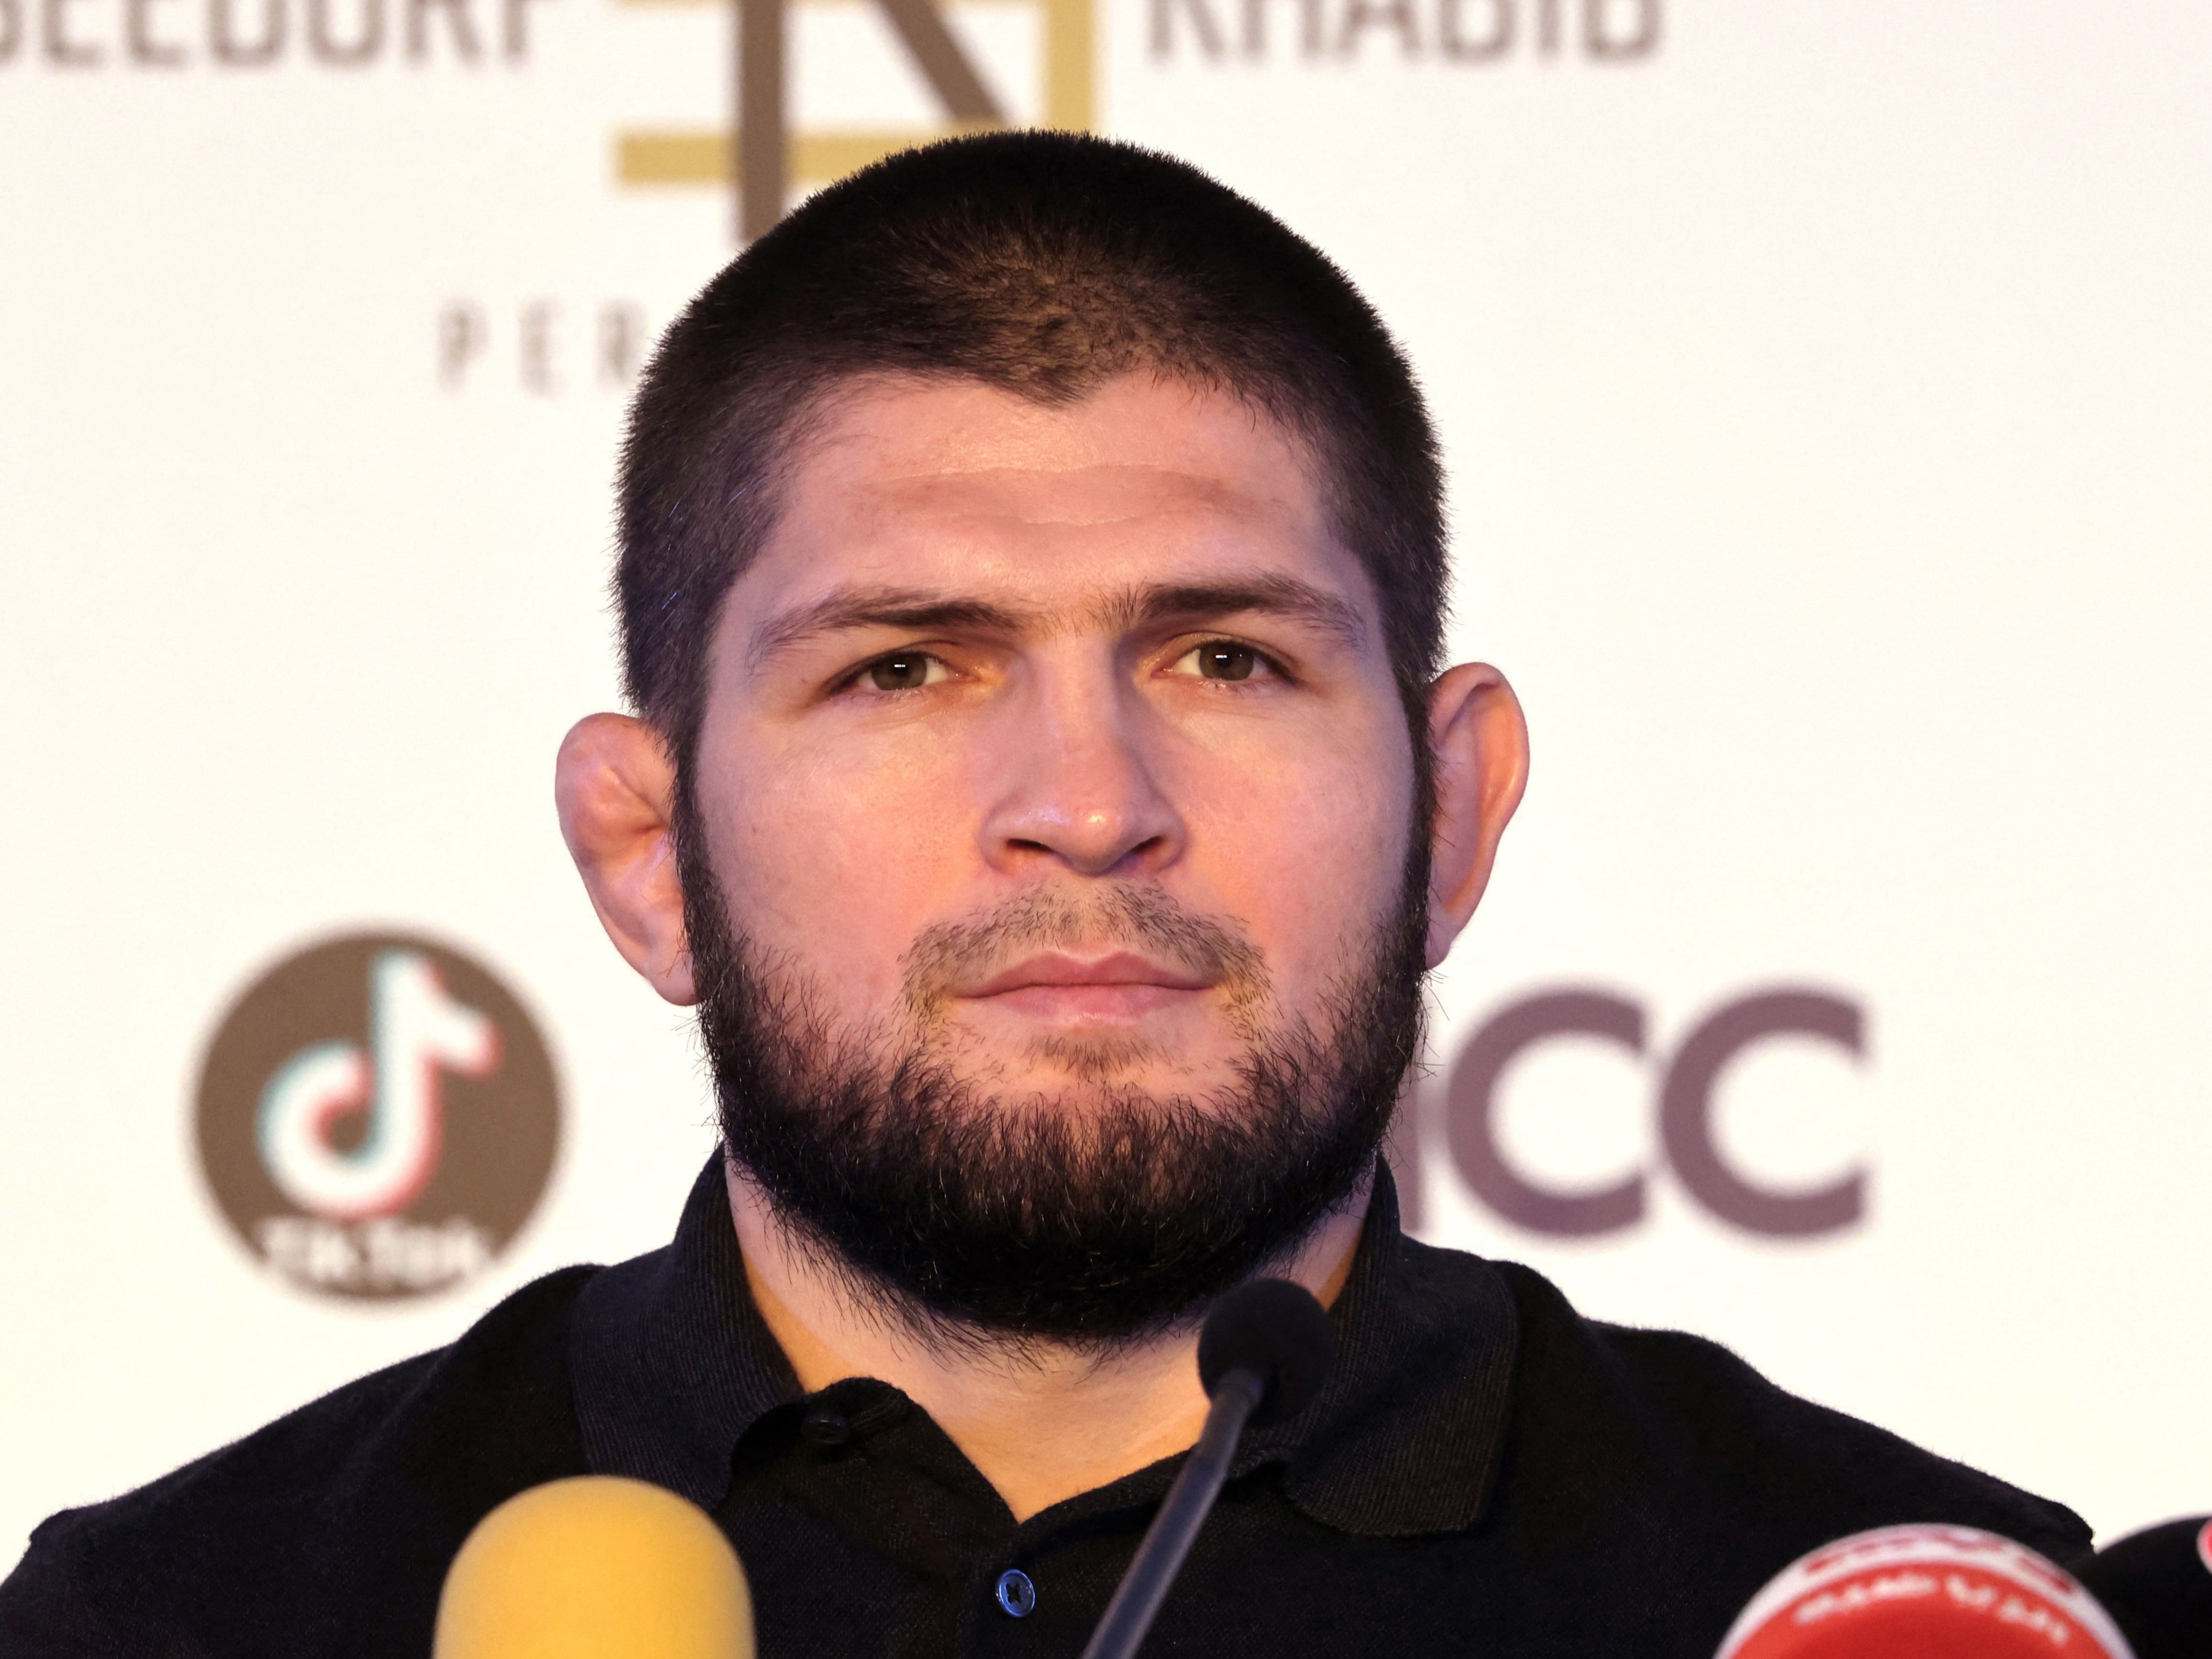 Former UFC champion Khabib now coaches and promotes fighters